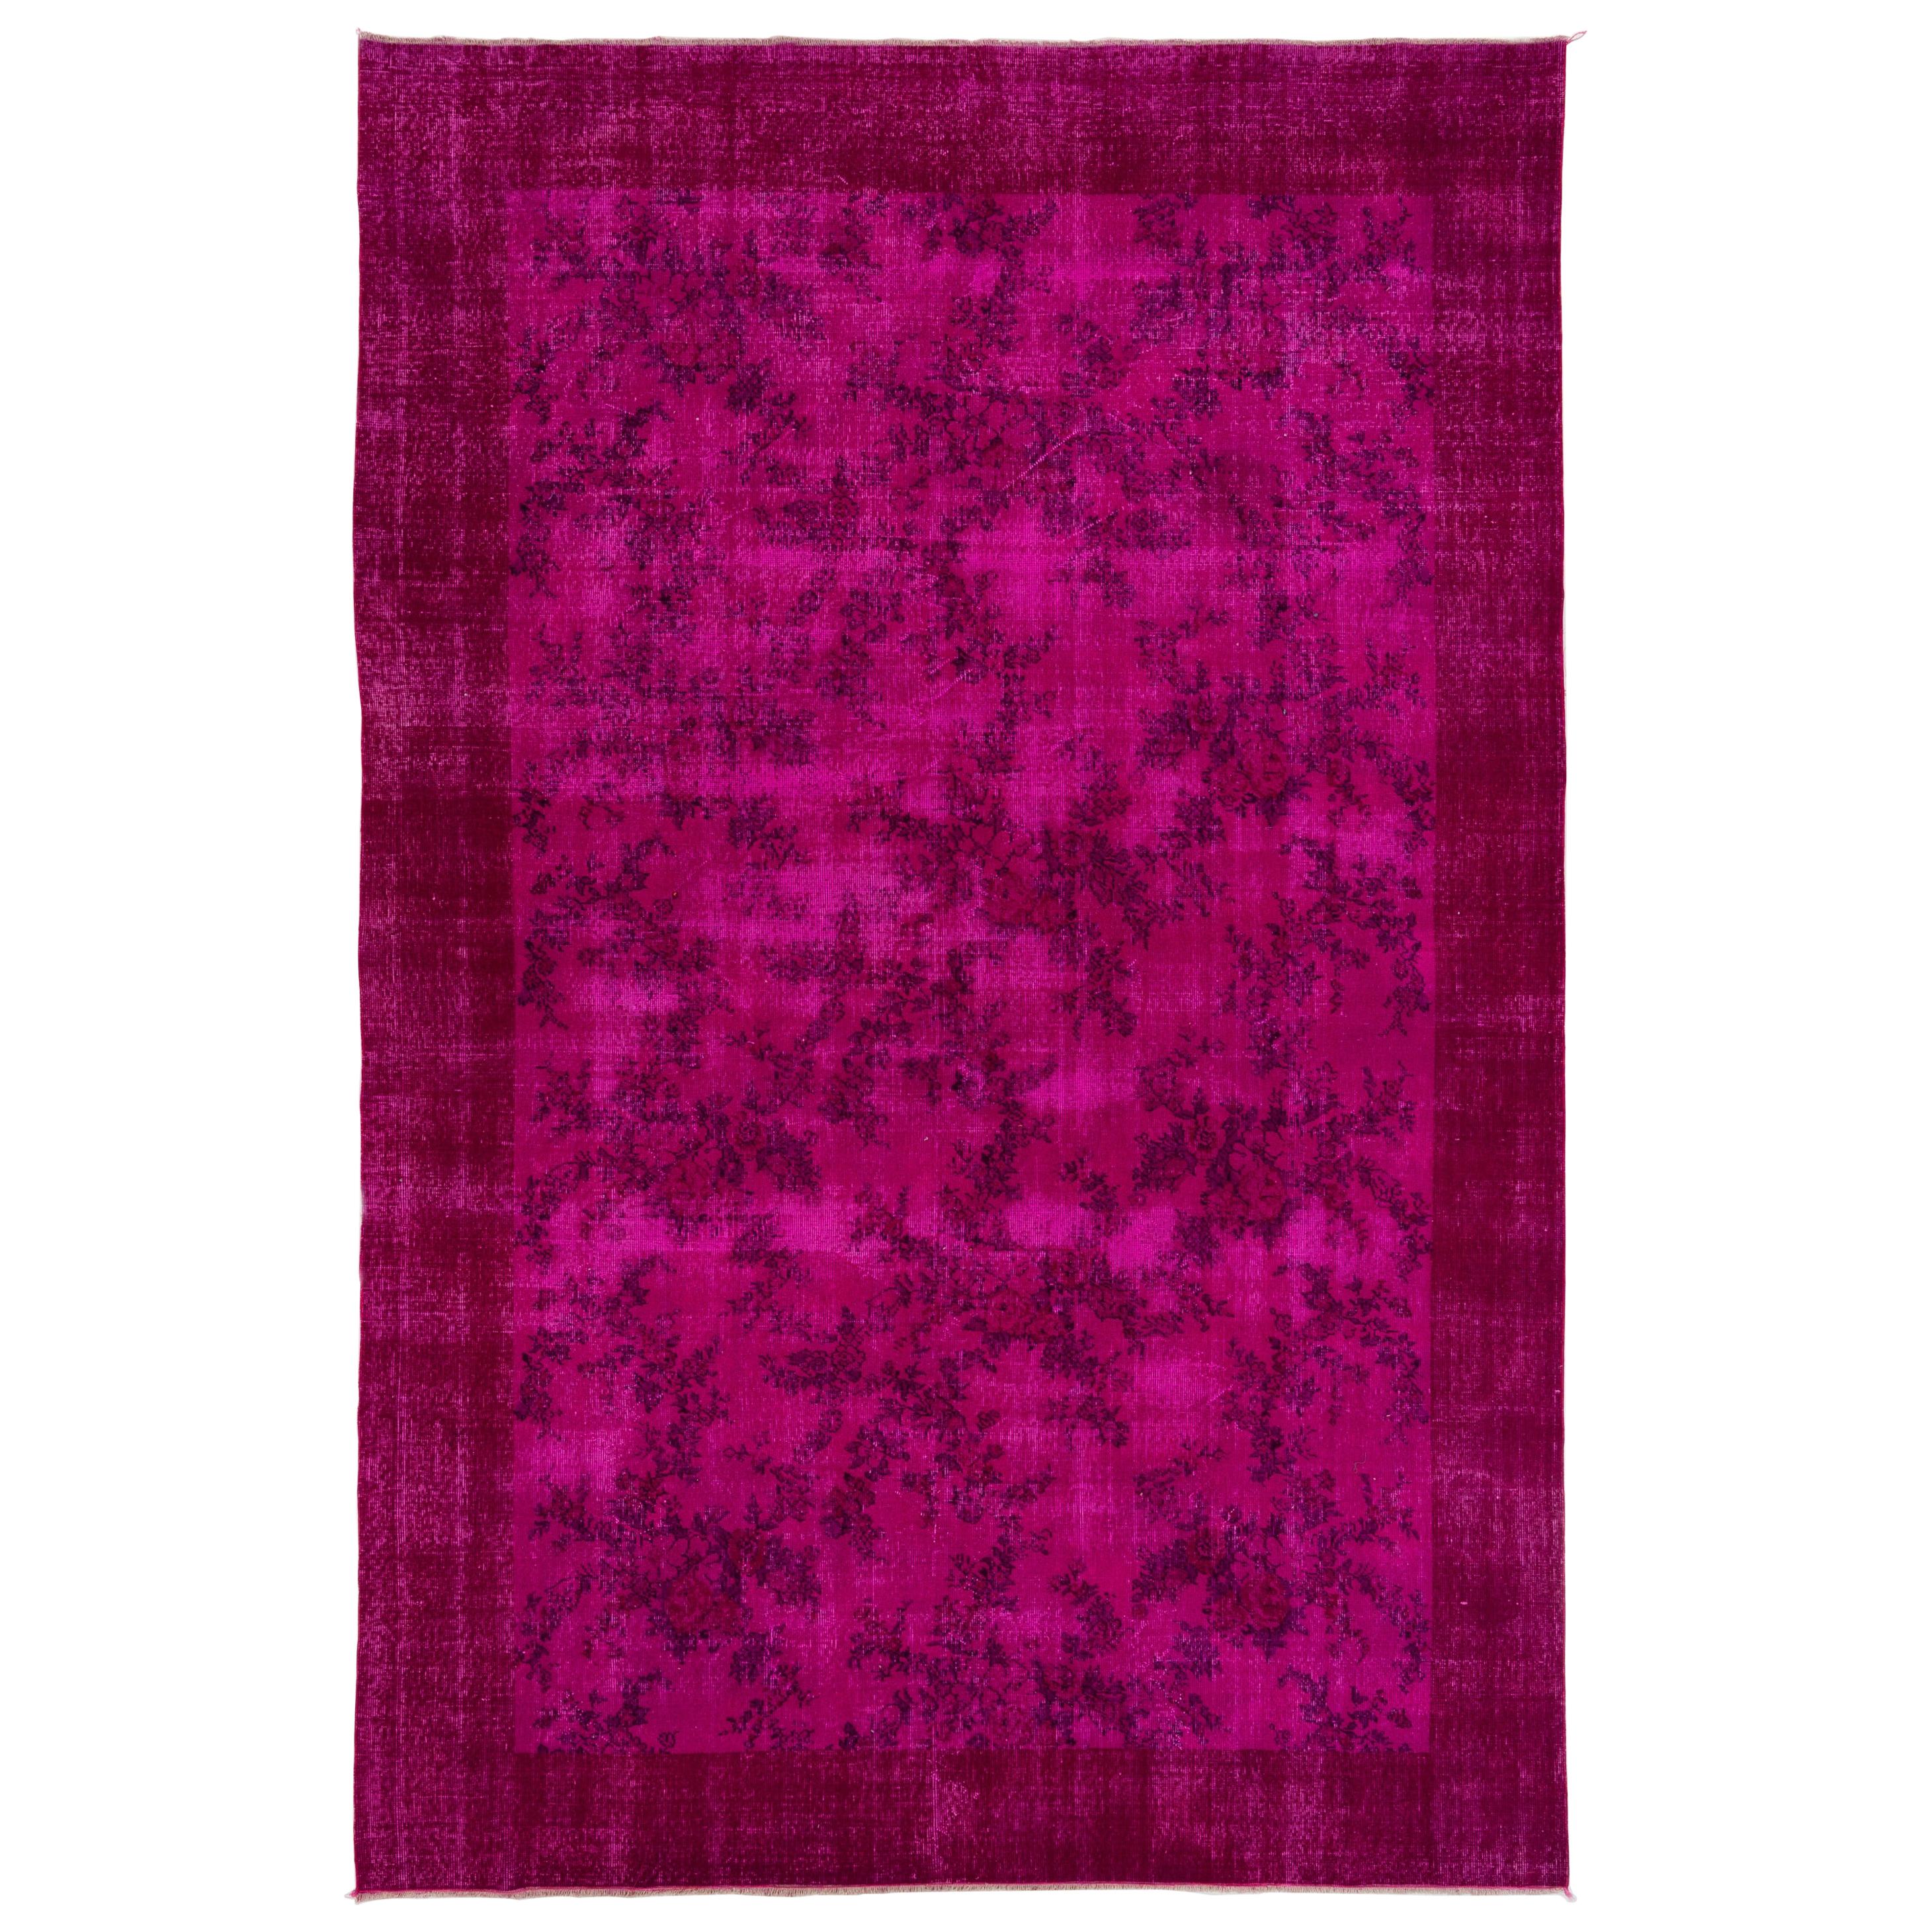 Vintage Turkish Rug with Floral Design Re-Dyed in Fuschia Pink Color